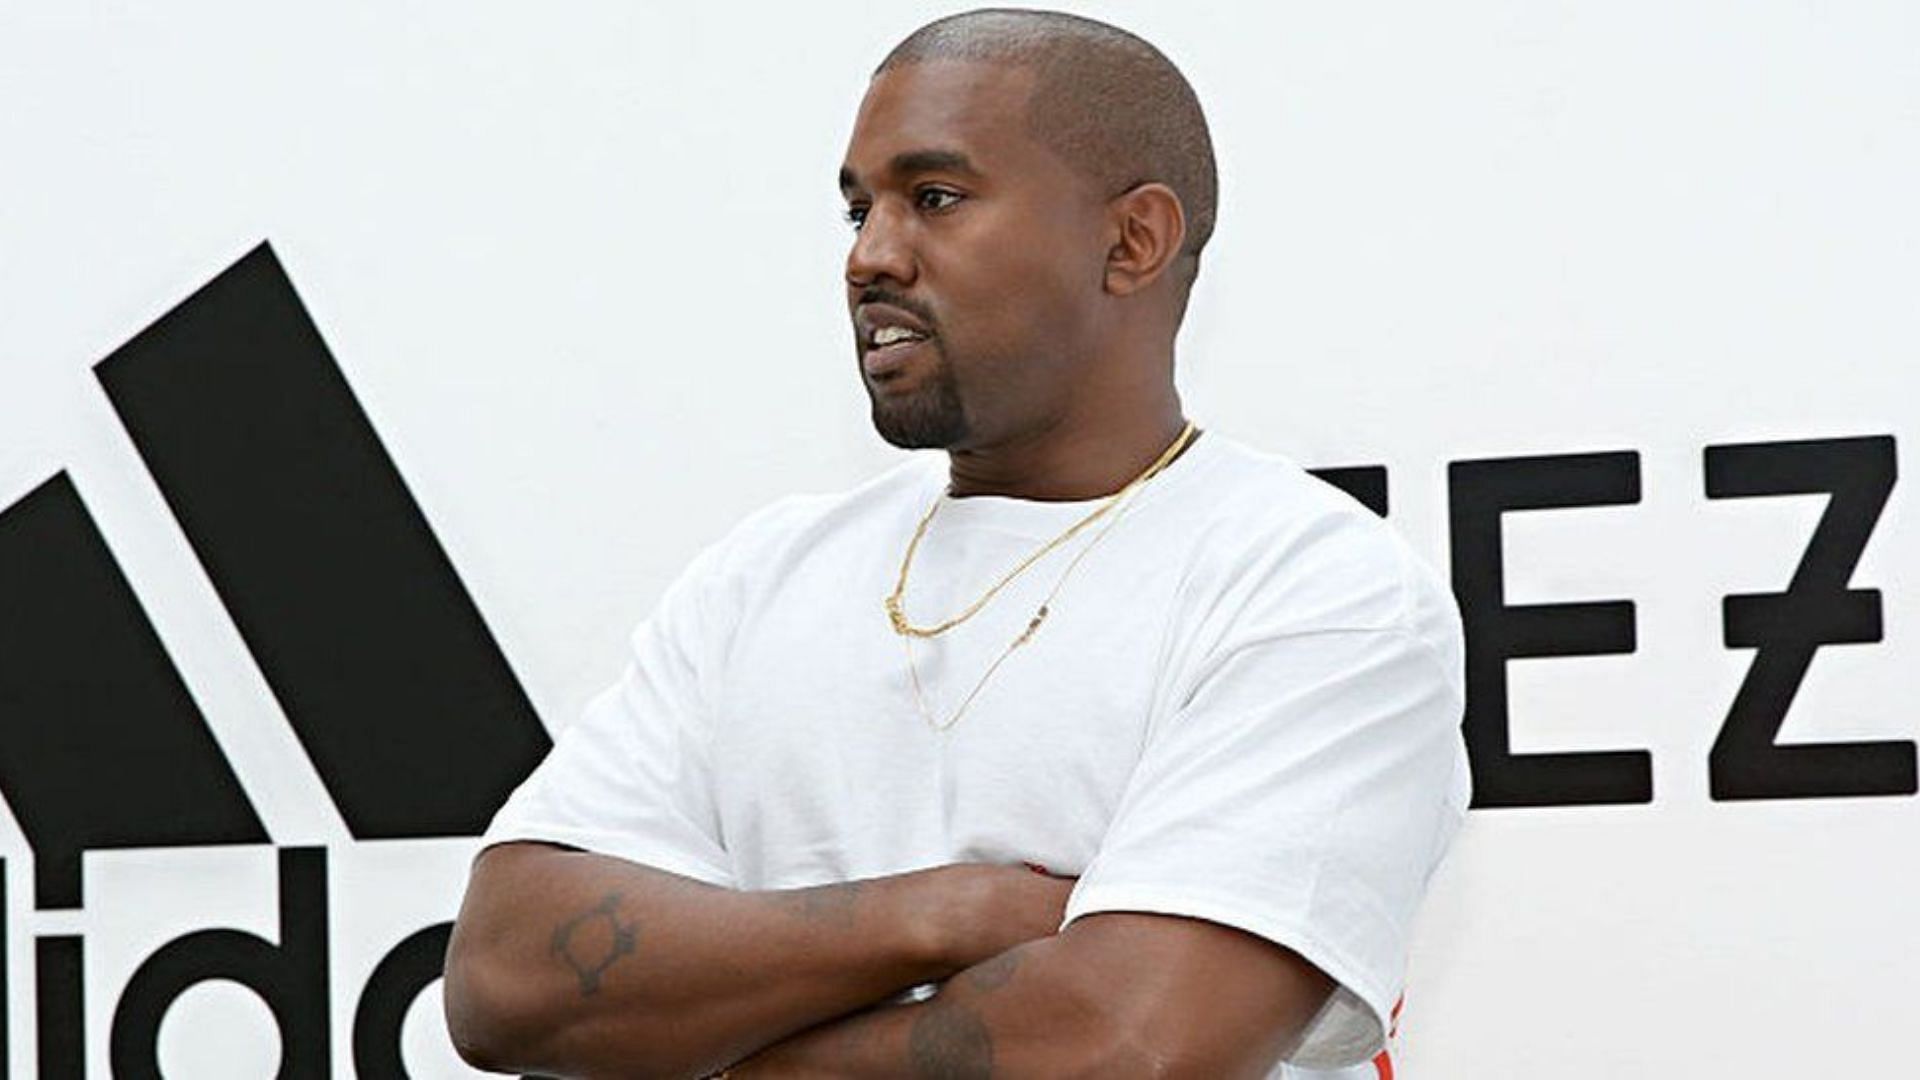 Adidas cuts ties with Kanye West (Image via BBC) 